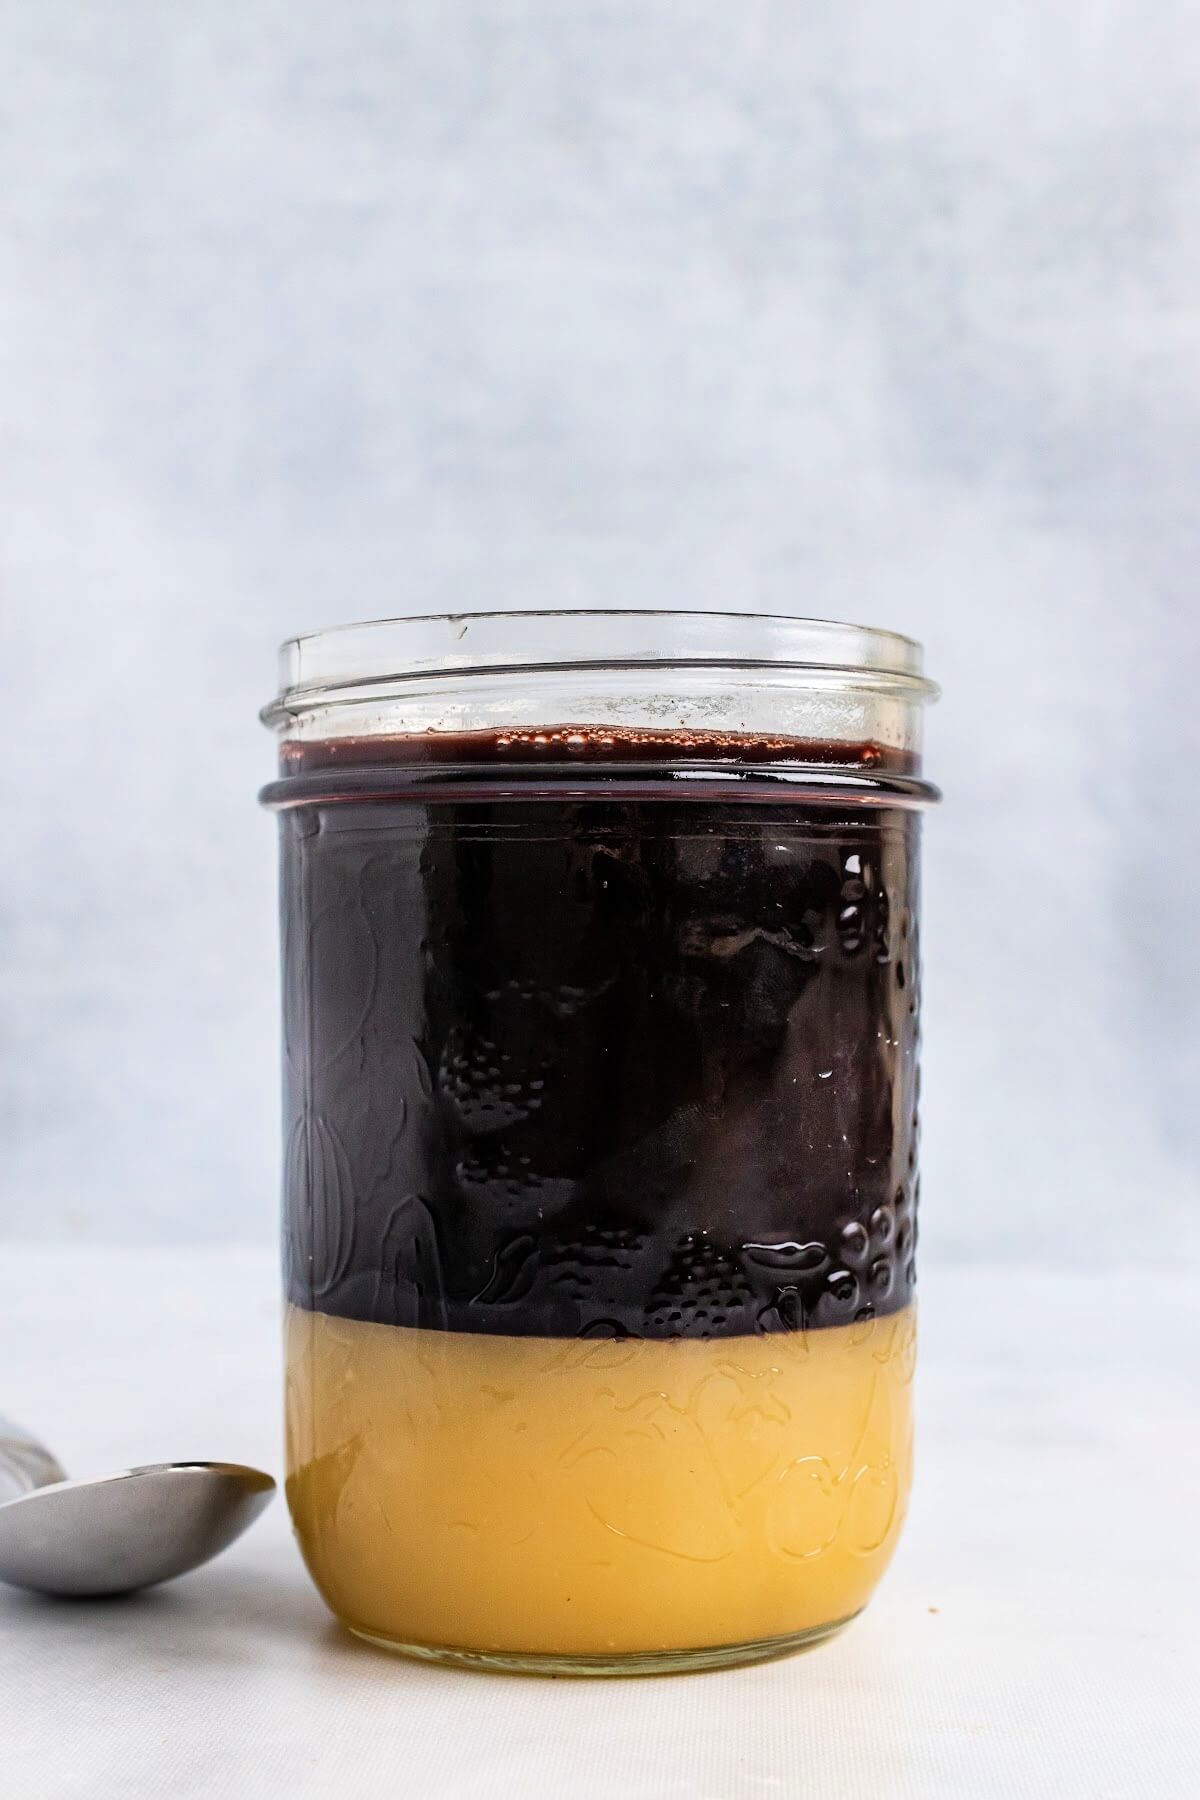 Mason jar ¾ filled with a dark purple syrup and ¼ filled at the bottom with honey, with a spoon sitting next to it.